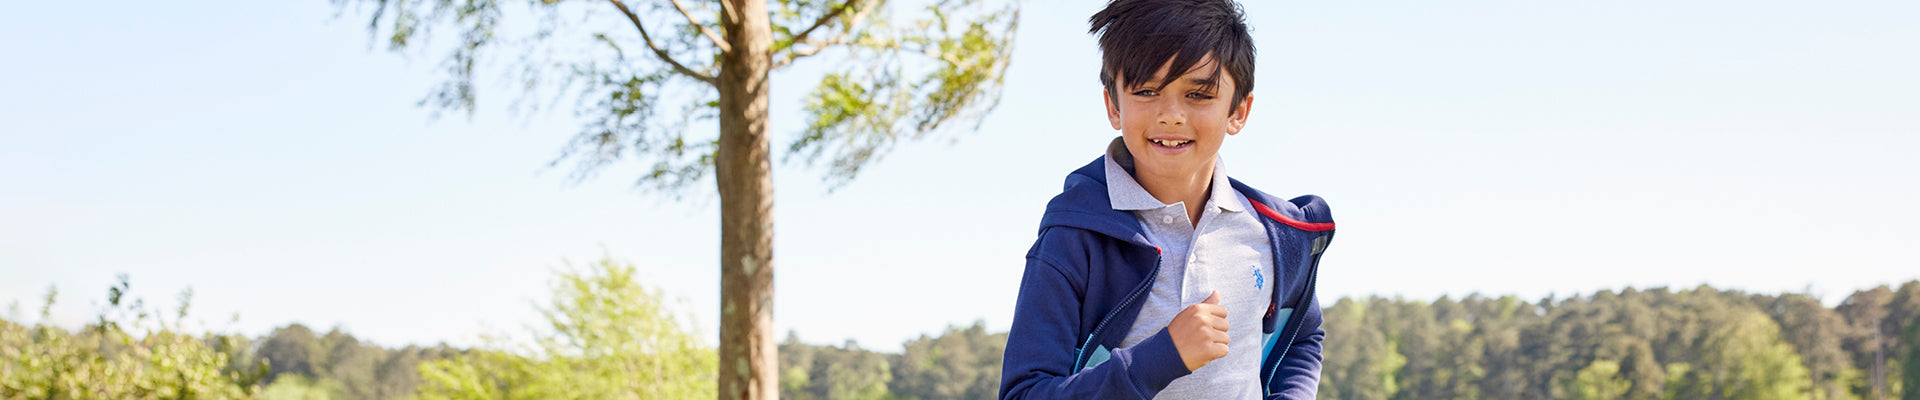 Shop the latest fashion trends for boys with essential items for any occasion. Browse through our collection of gilets, jackets, hoodies, sweaters, tops, sweatshirts, joggers, trousers, and more to prepare for any adventure or season.